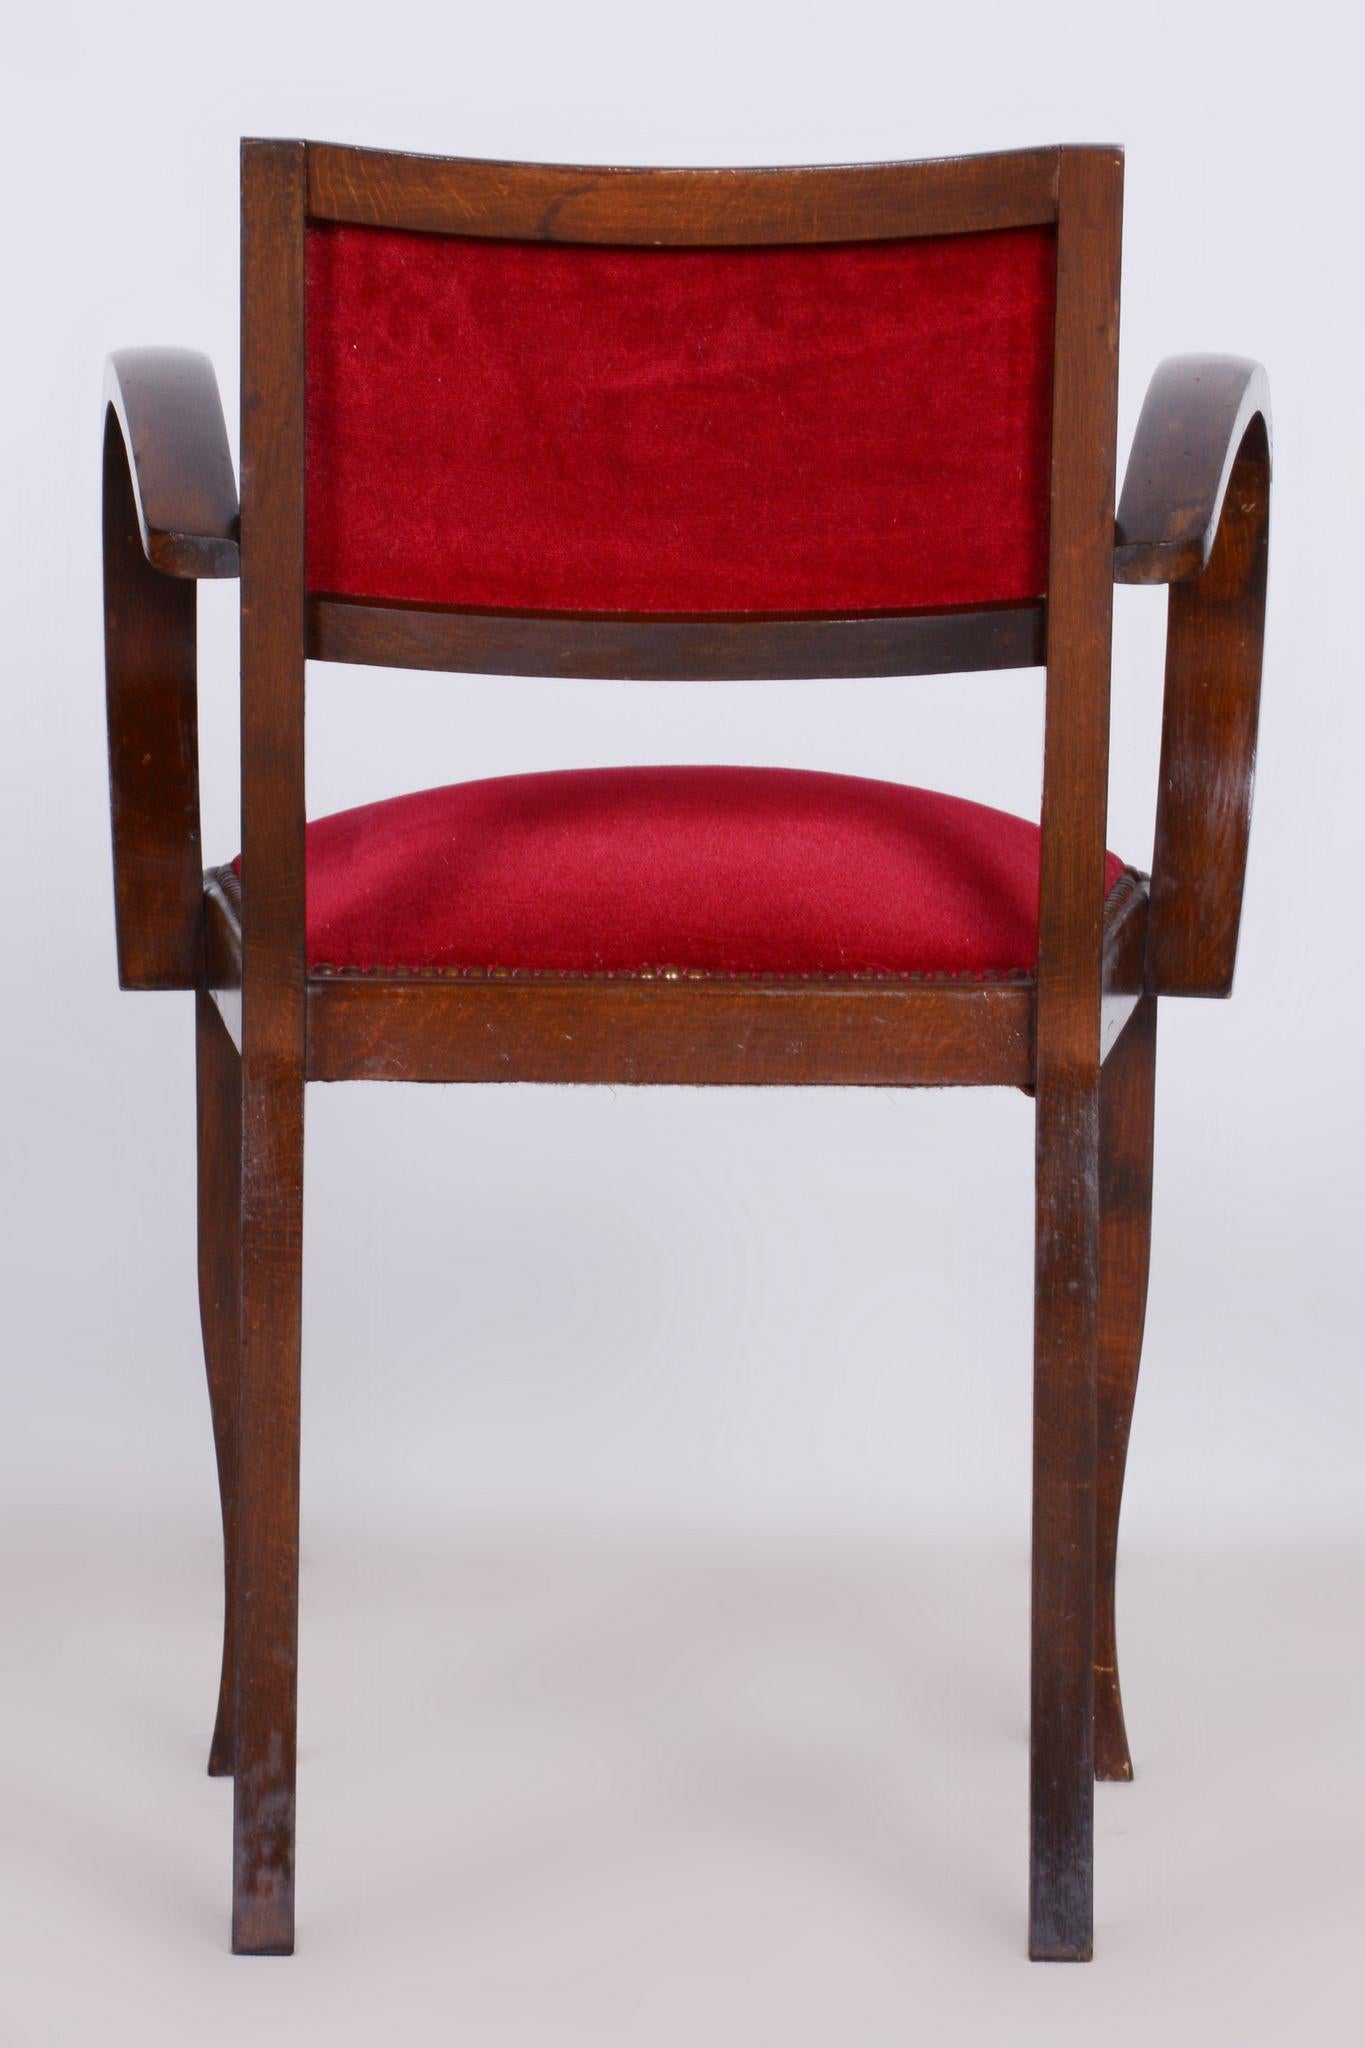 Restored Beech Art Deco Armchair by Jules Leleu, Revived Polish, France, 1930s For Sale 3